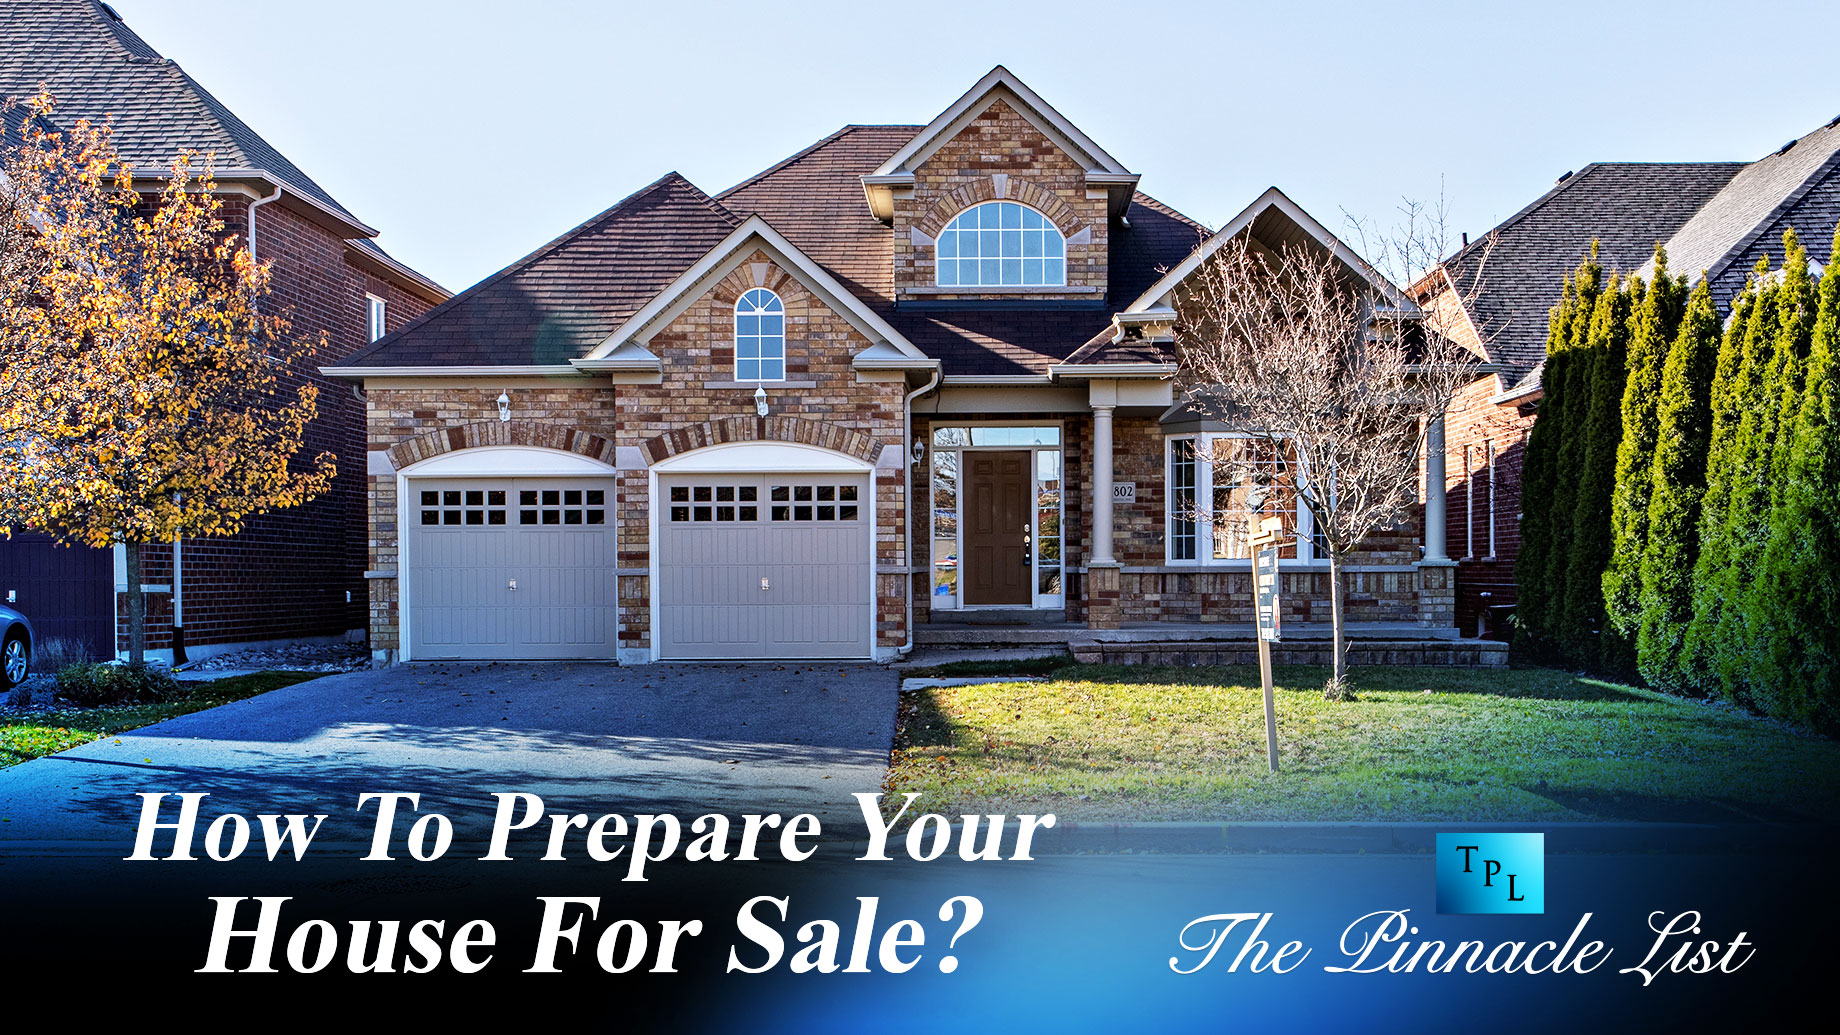 How To Prepare Your House For Sale?